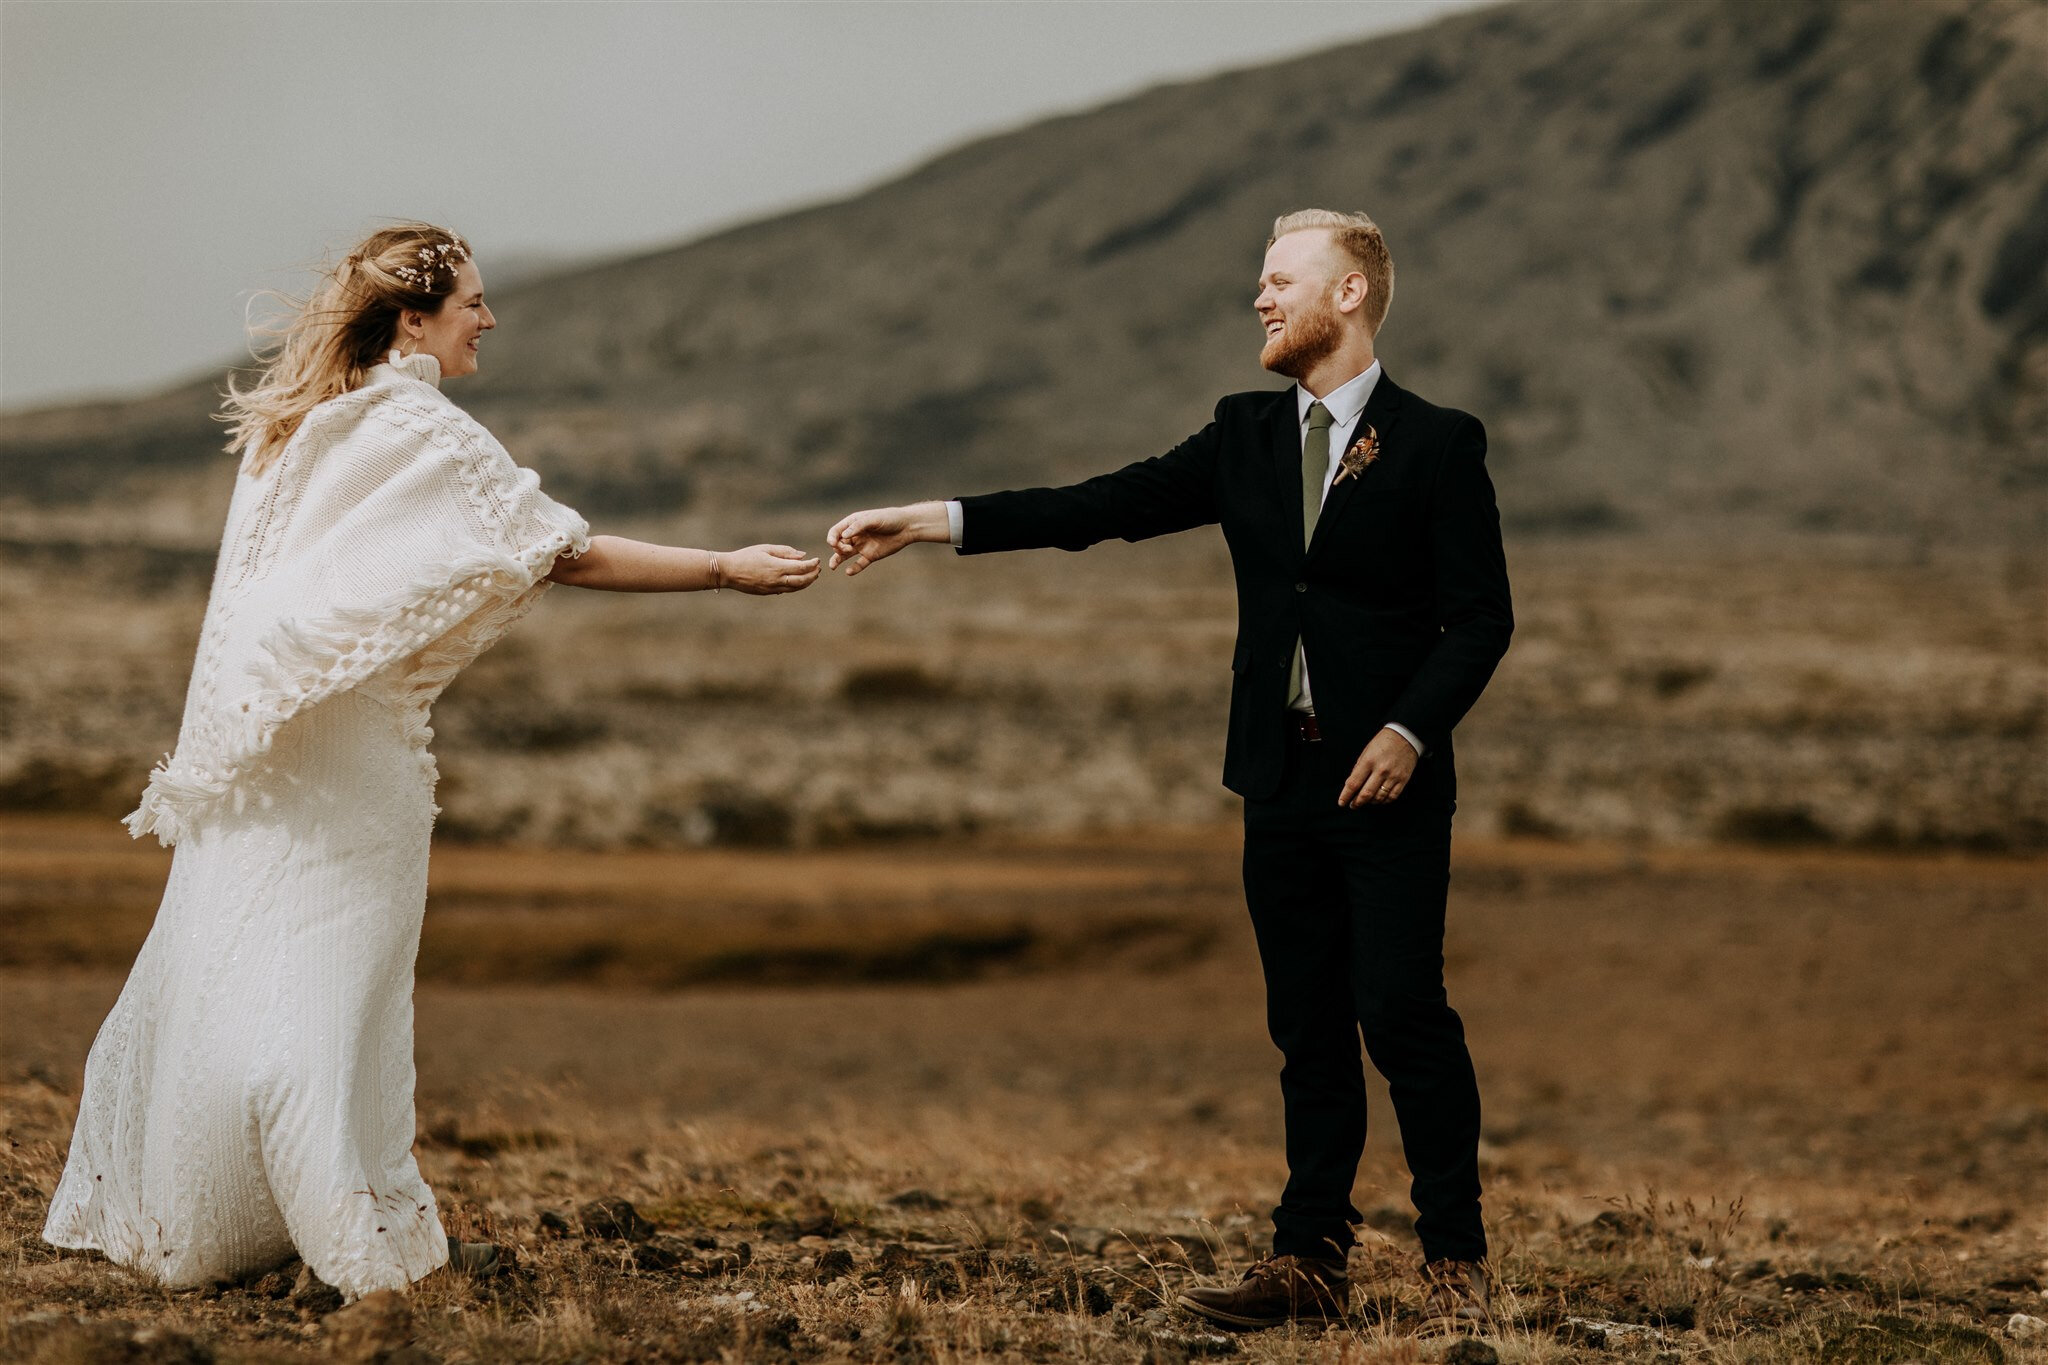 Budir church Iceland elopement | best locations to elope in iceland | zakas photo 